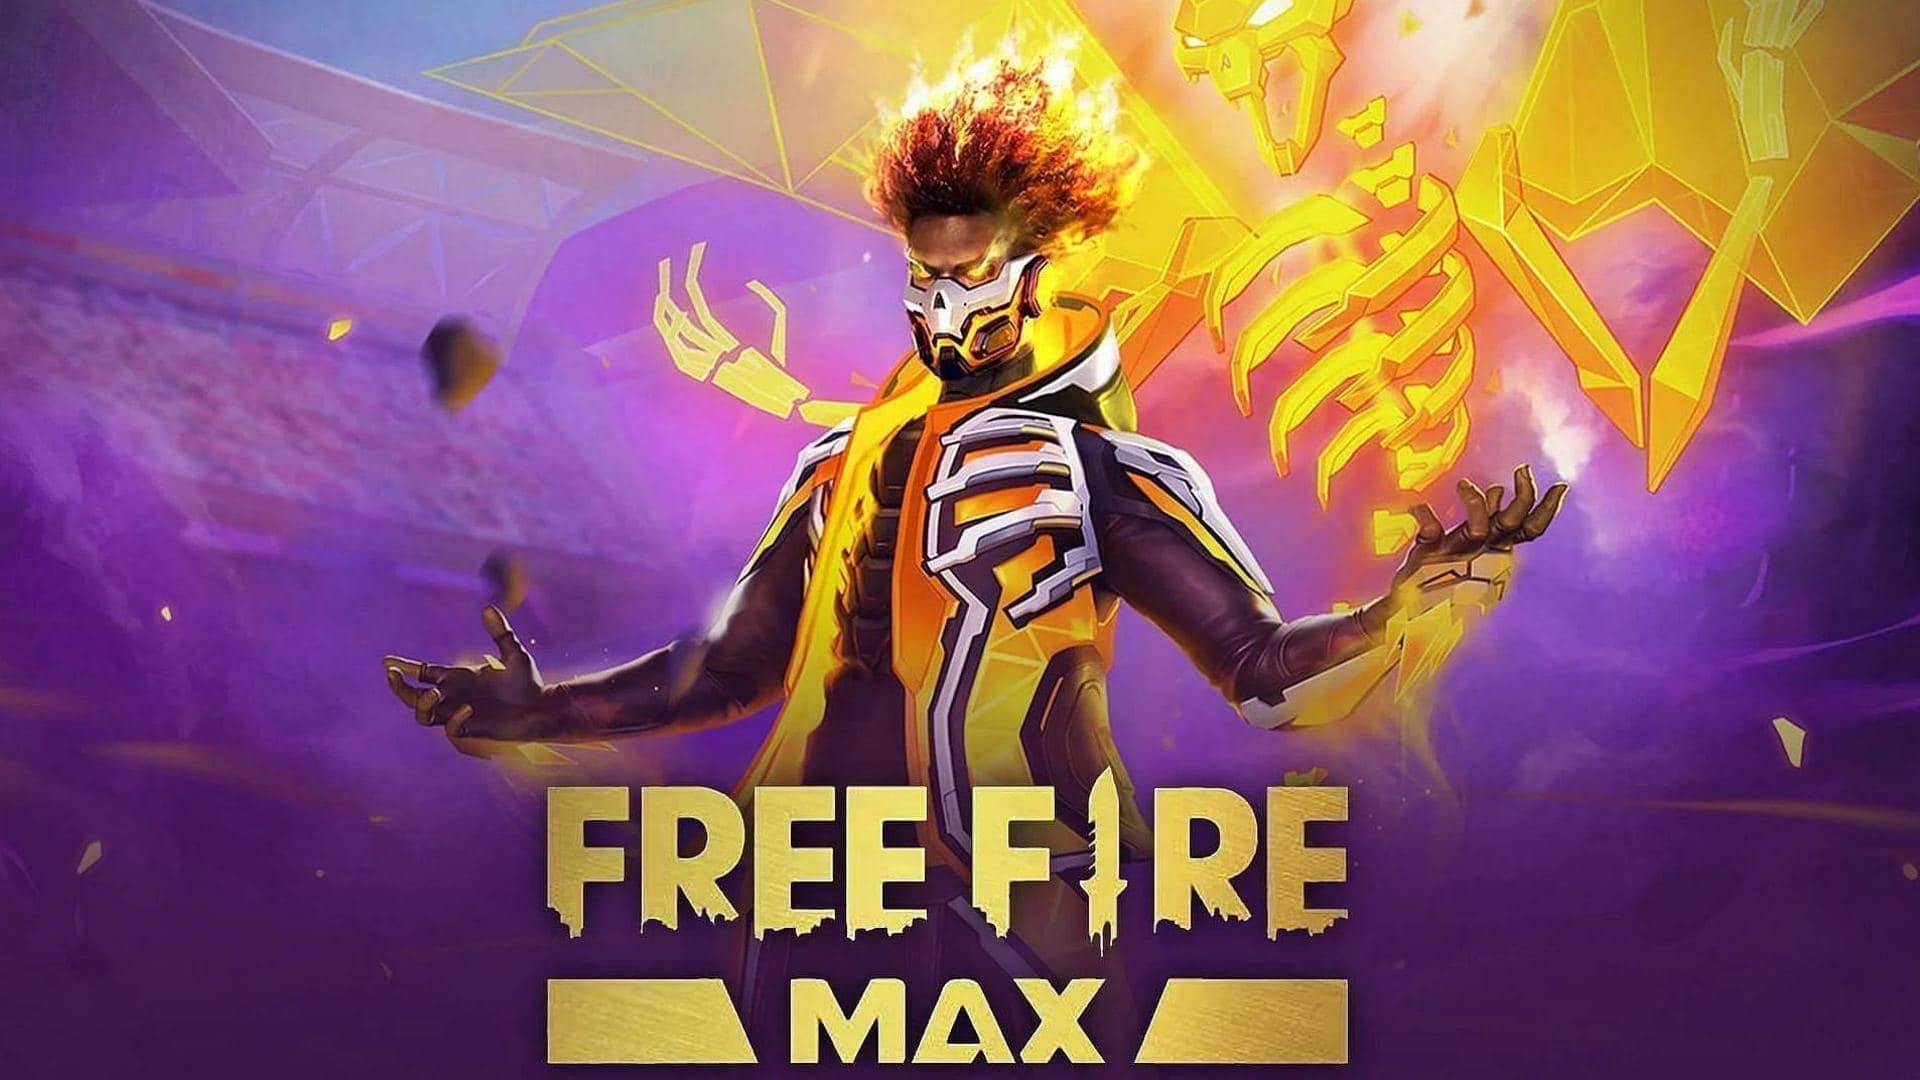 How to redeem Free Fire MAX codes for January 1?